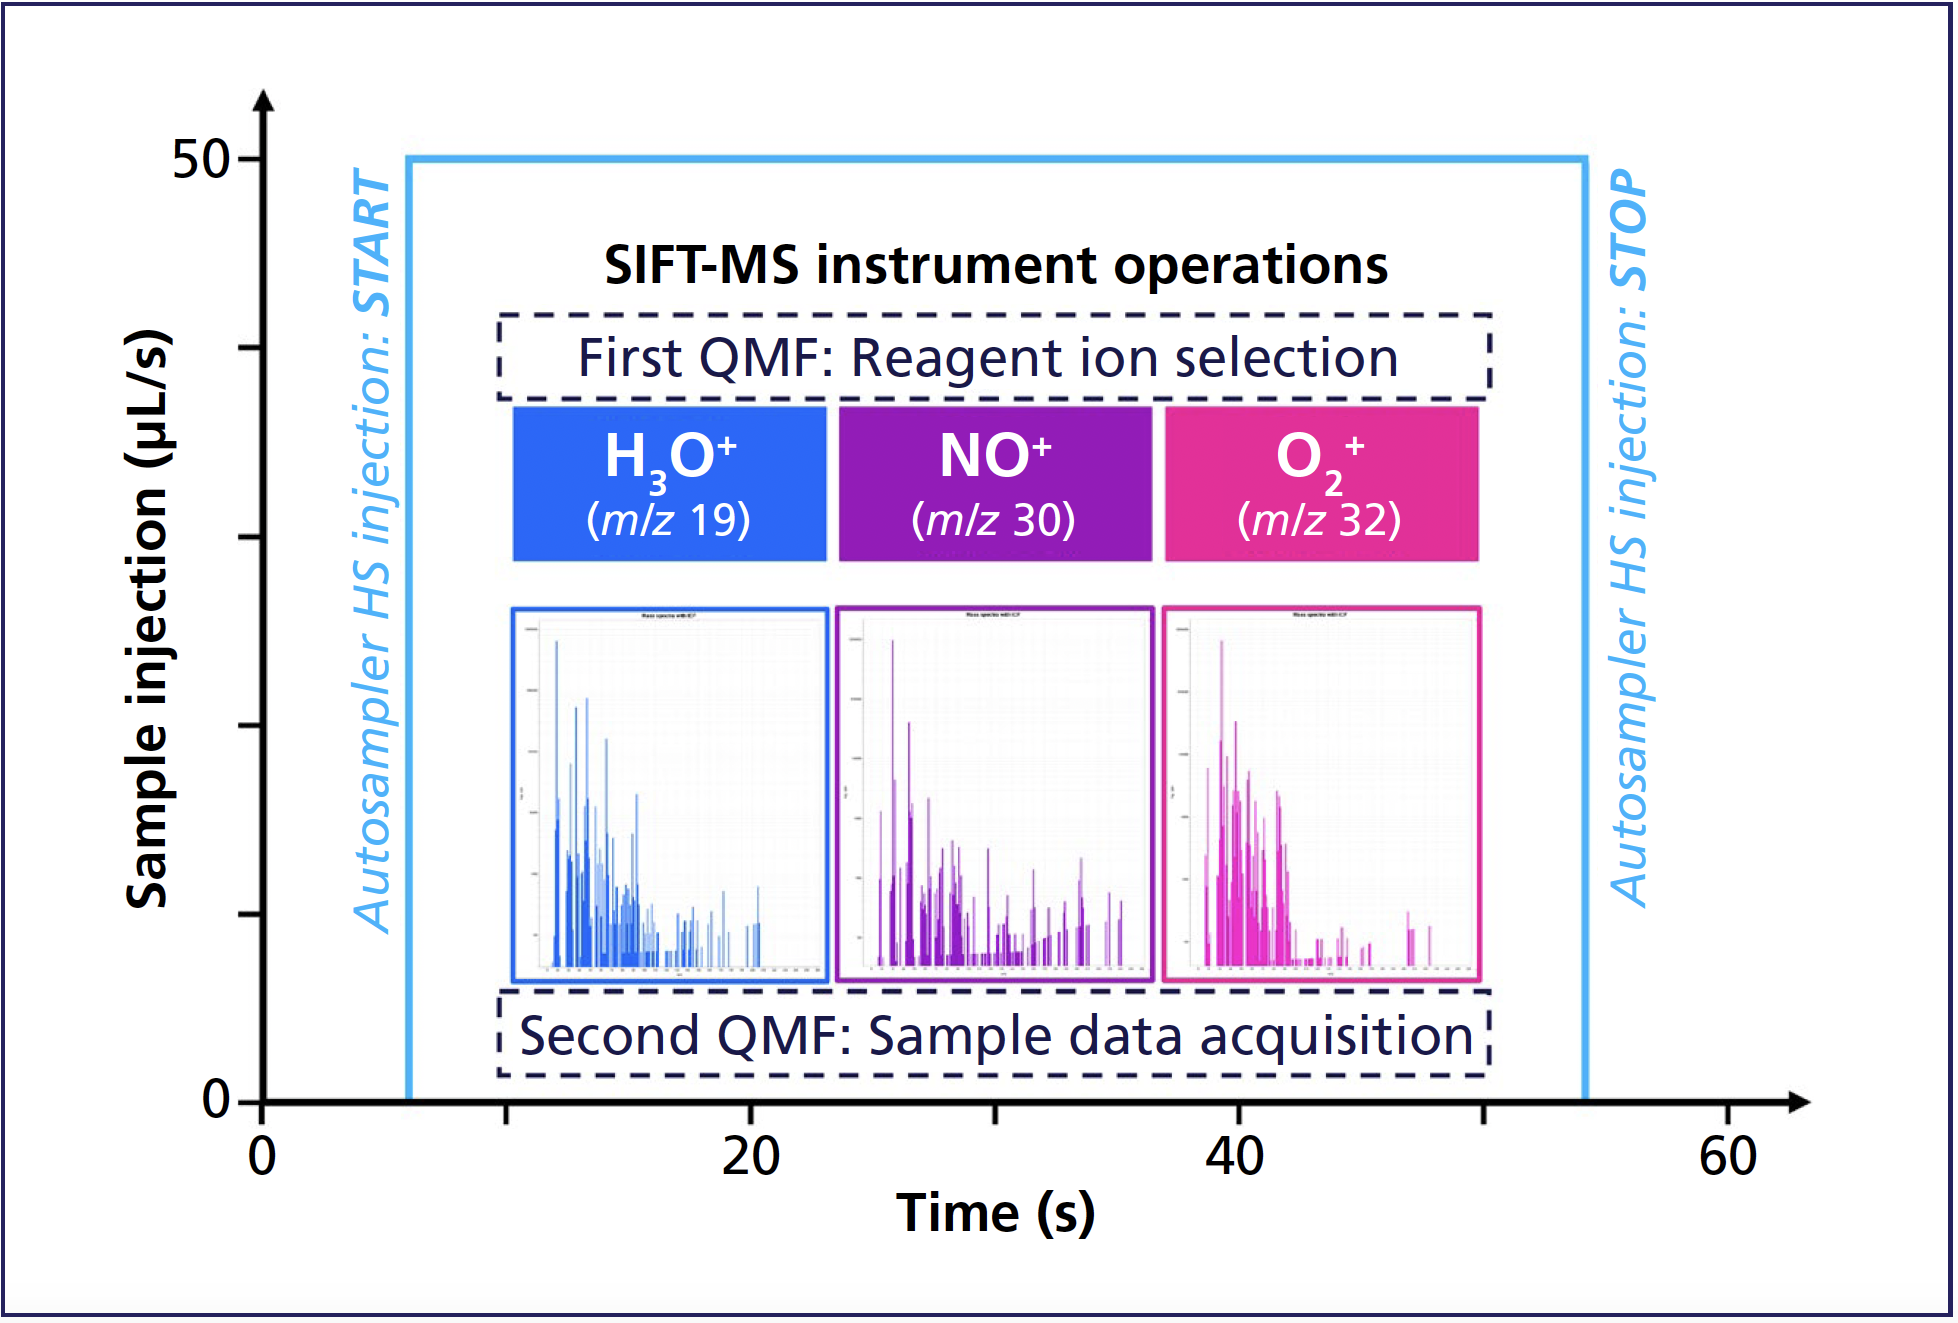 FIGURE 1: Automated SIFT-MS full-scan acquisition for all three reagent ions from a single headspace injection. The example spectra are from a beer sample in the example below (plotted on a logarithmic intensity scale to better show product ions formed; the largest signal is the reagent ion). Note: QMF is quadrupole mass filter.